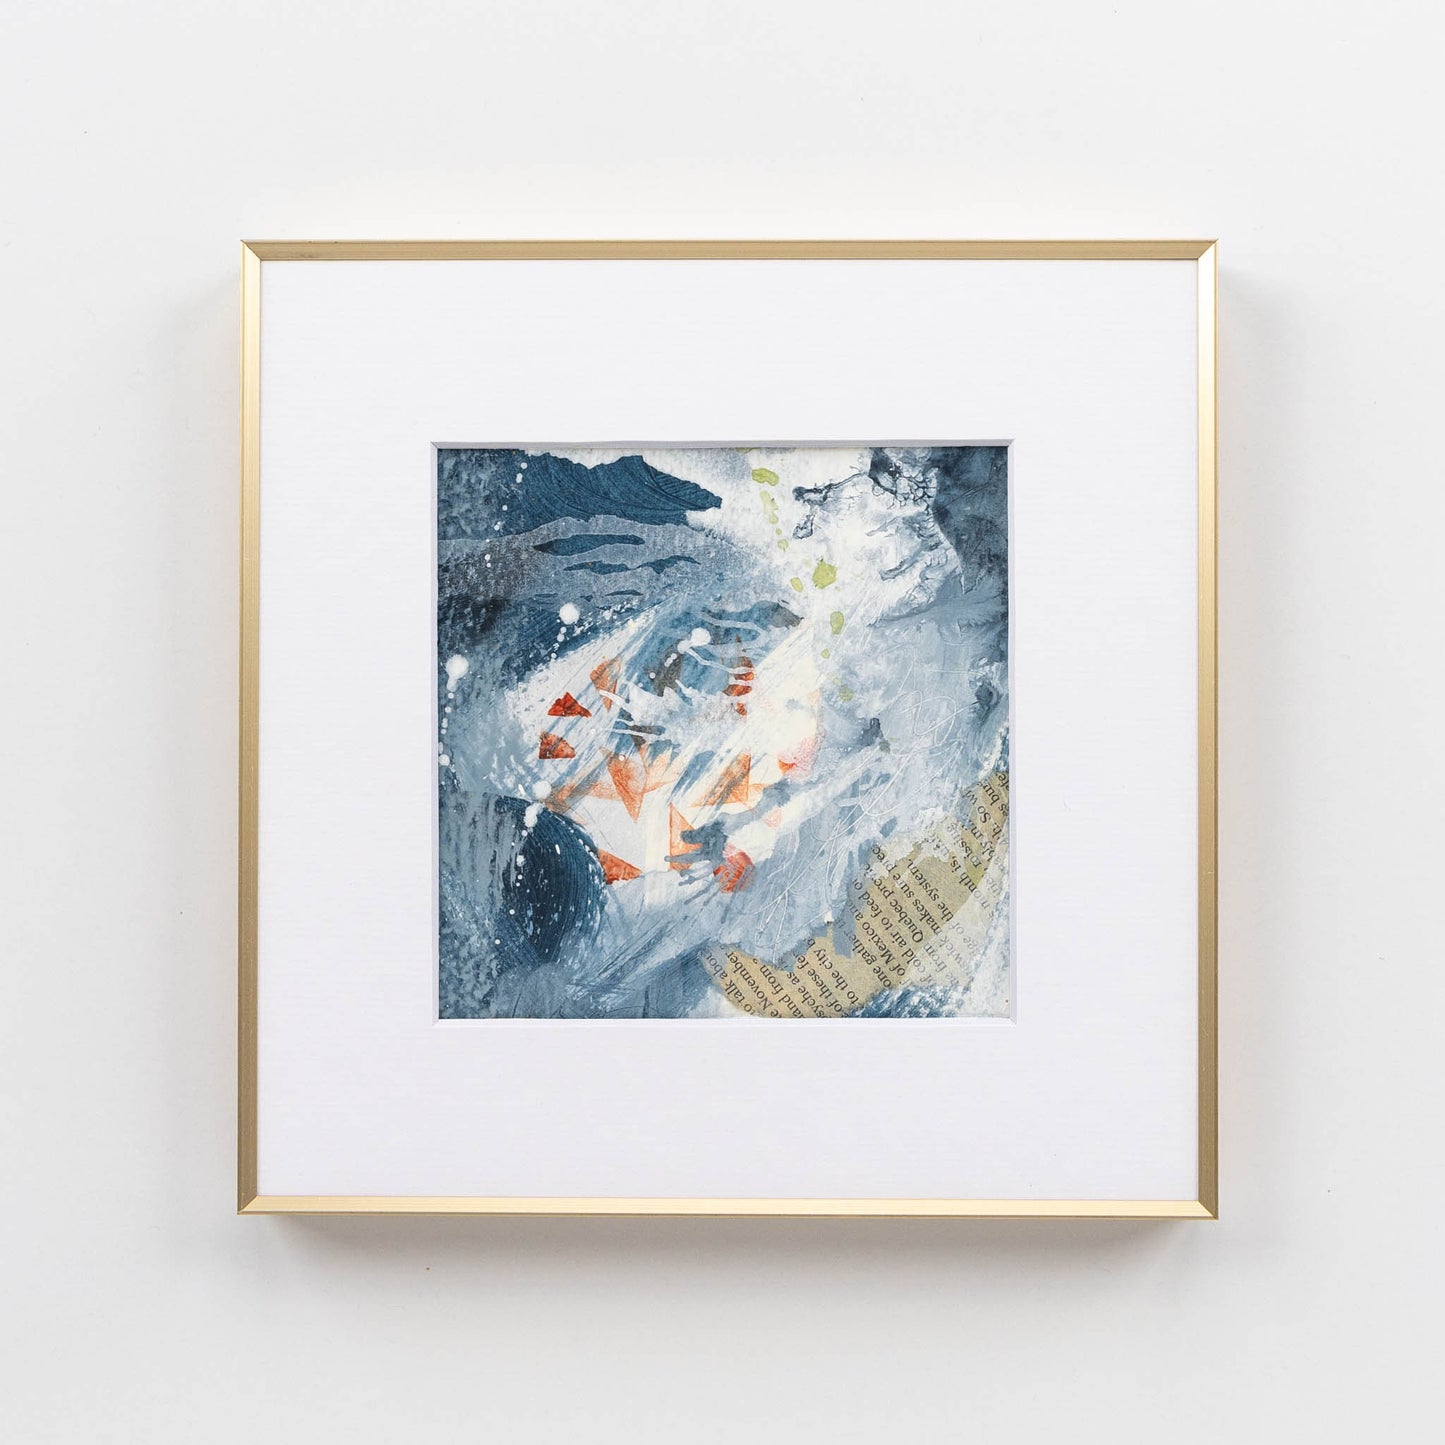 Atmosphere III | Framed 5x5 inch Acrylic Painting